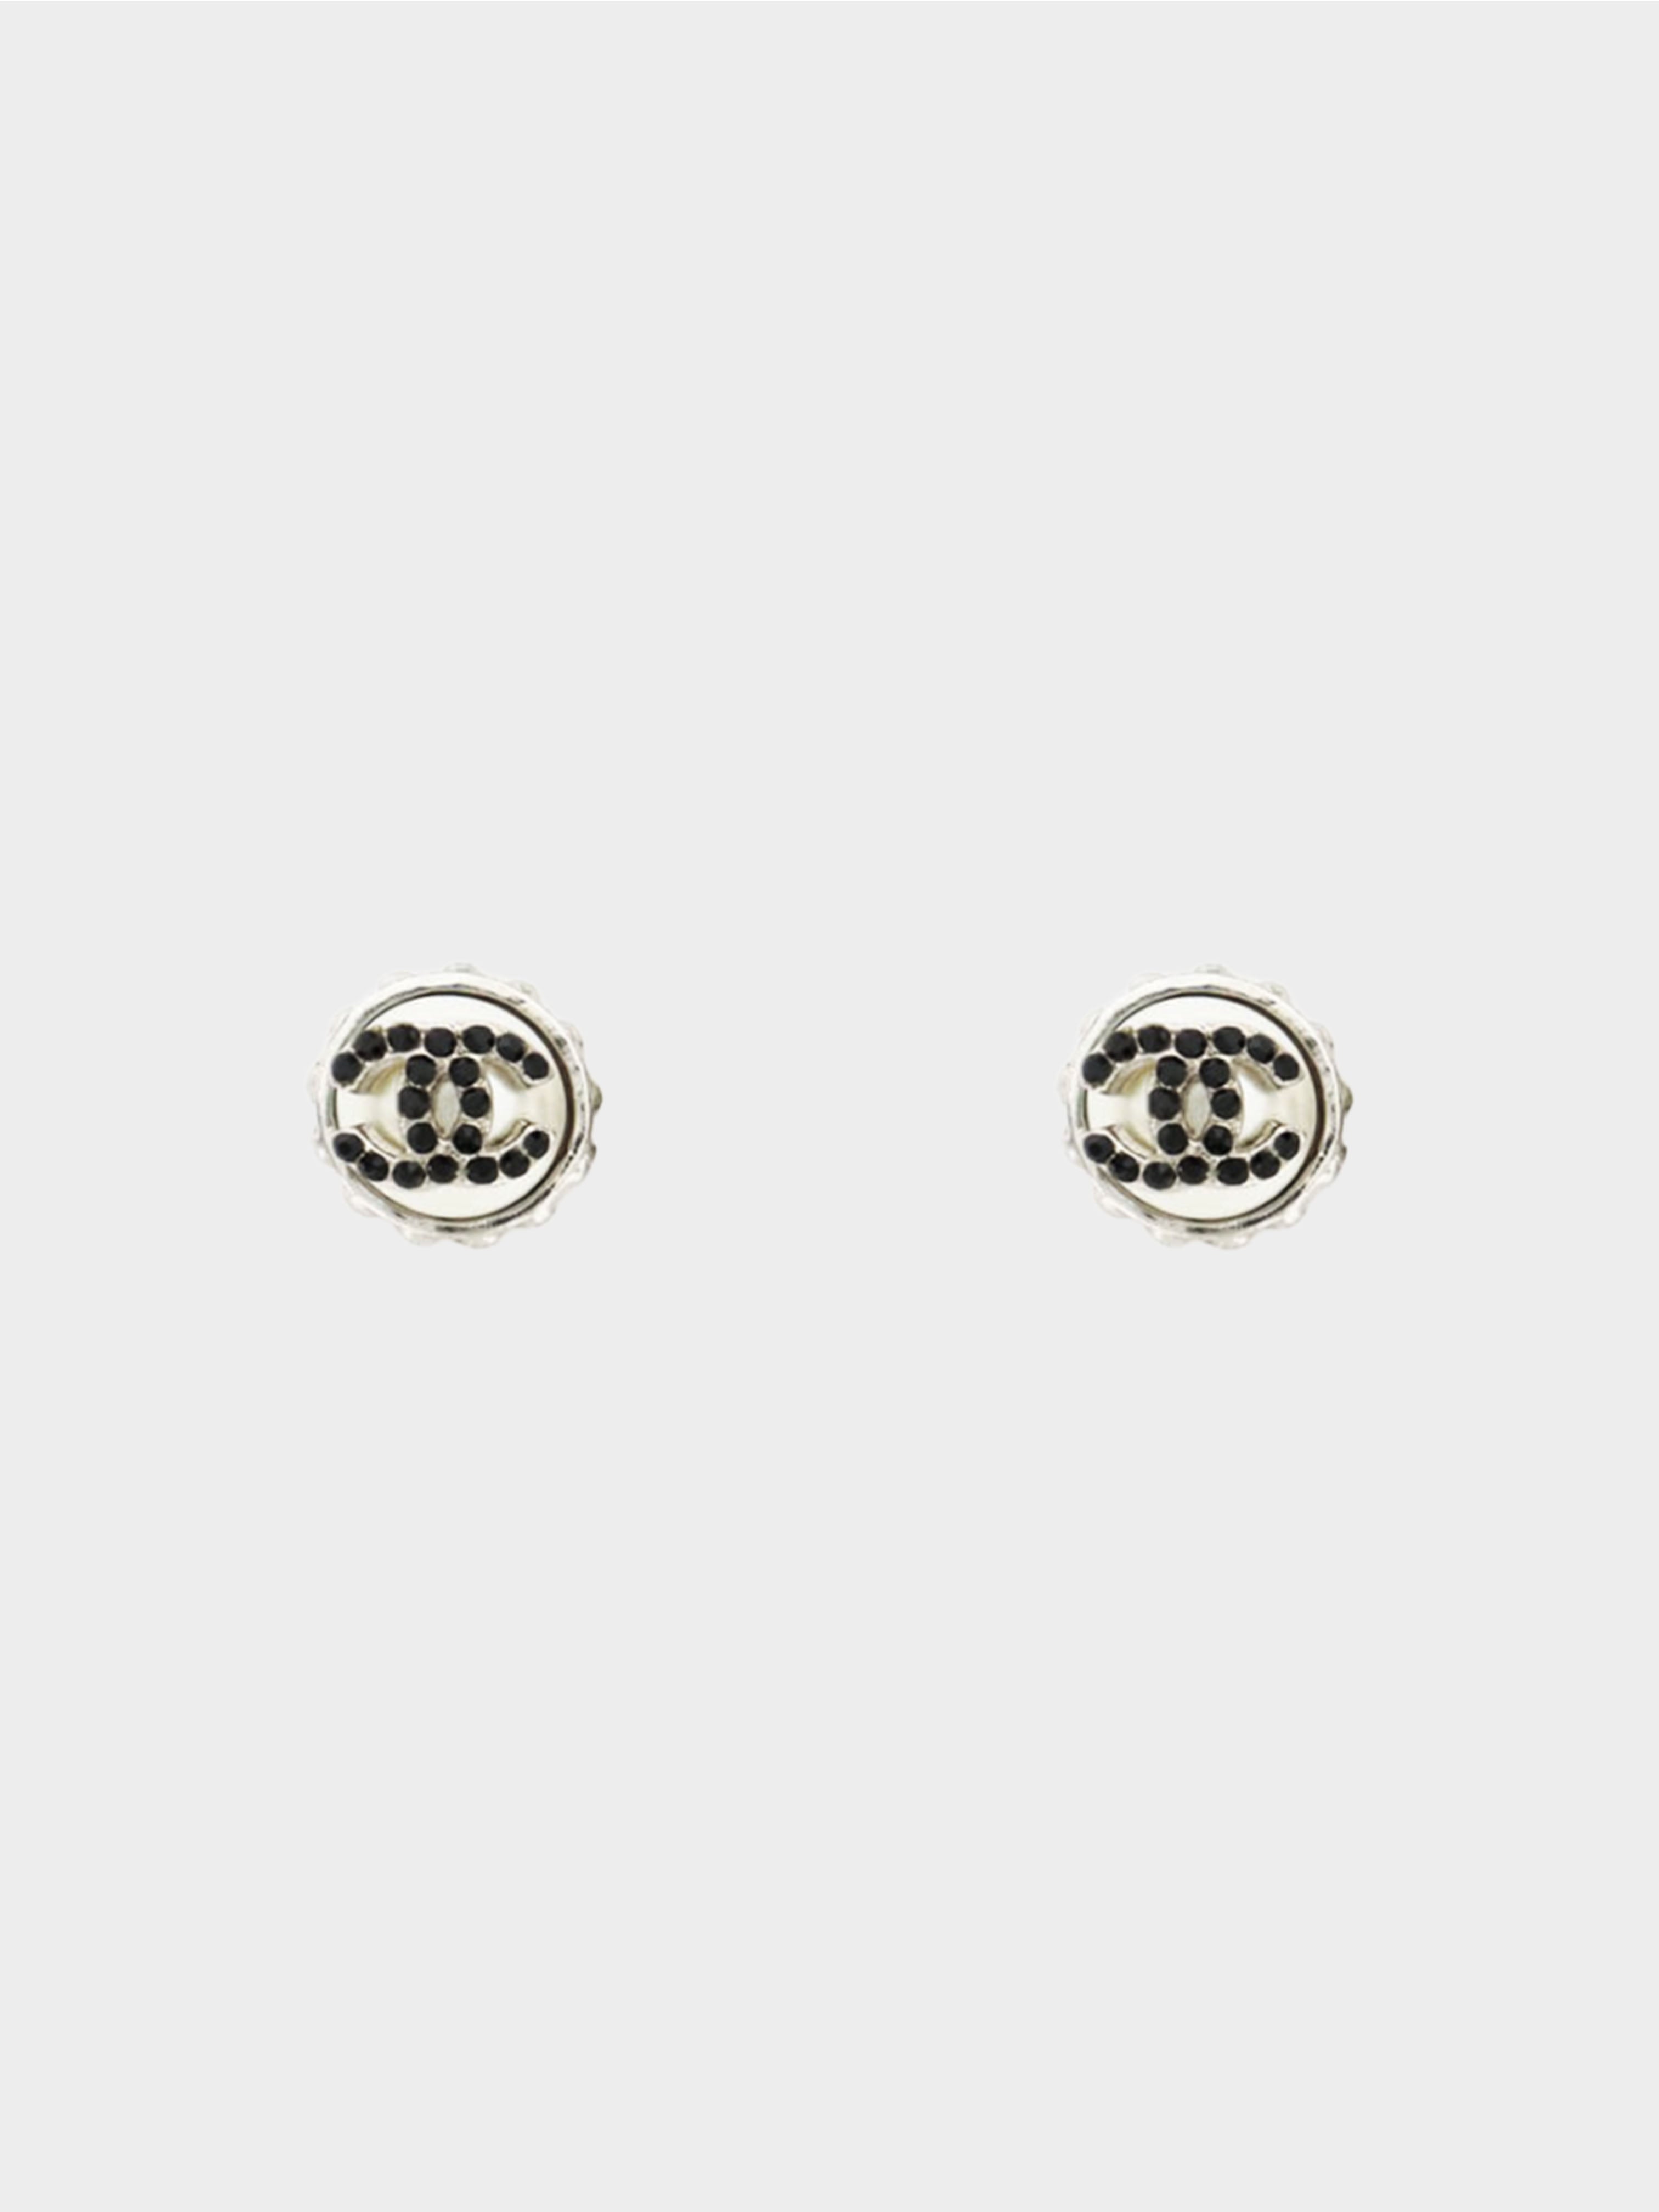 Buy Chanel CHANEL Size:- C22 Coco Mark Rhinestone Earrings from Japan - Buy  authentic Plus exclusive items from Japan